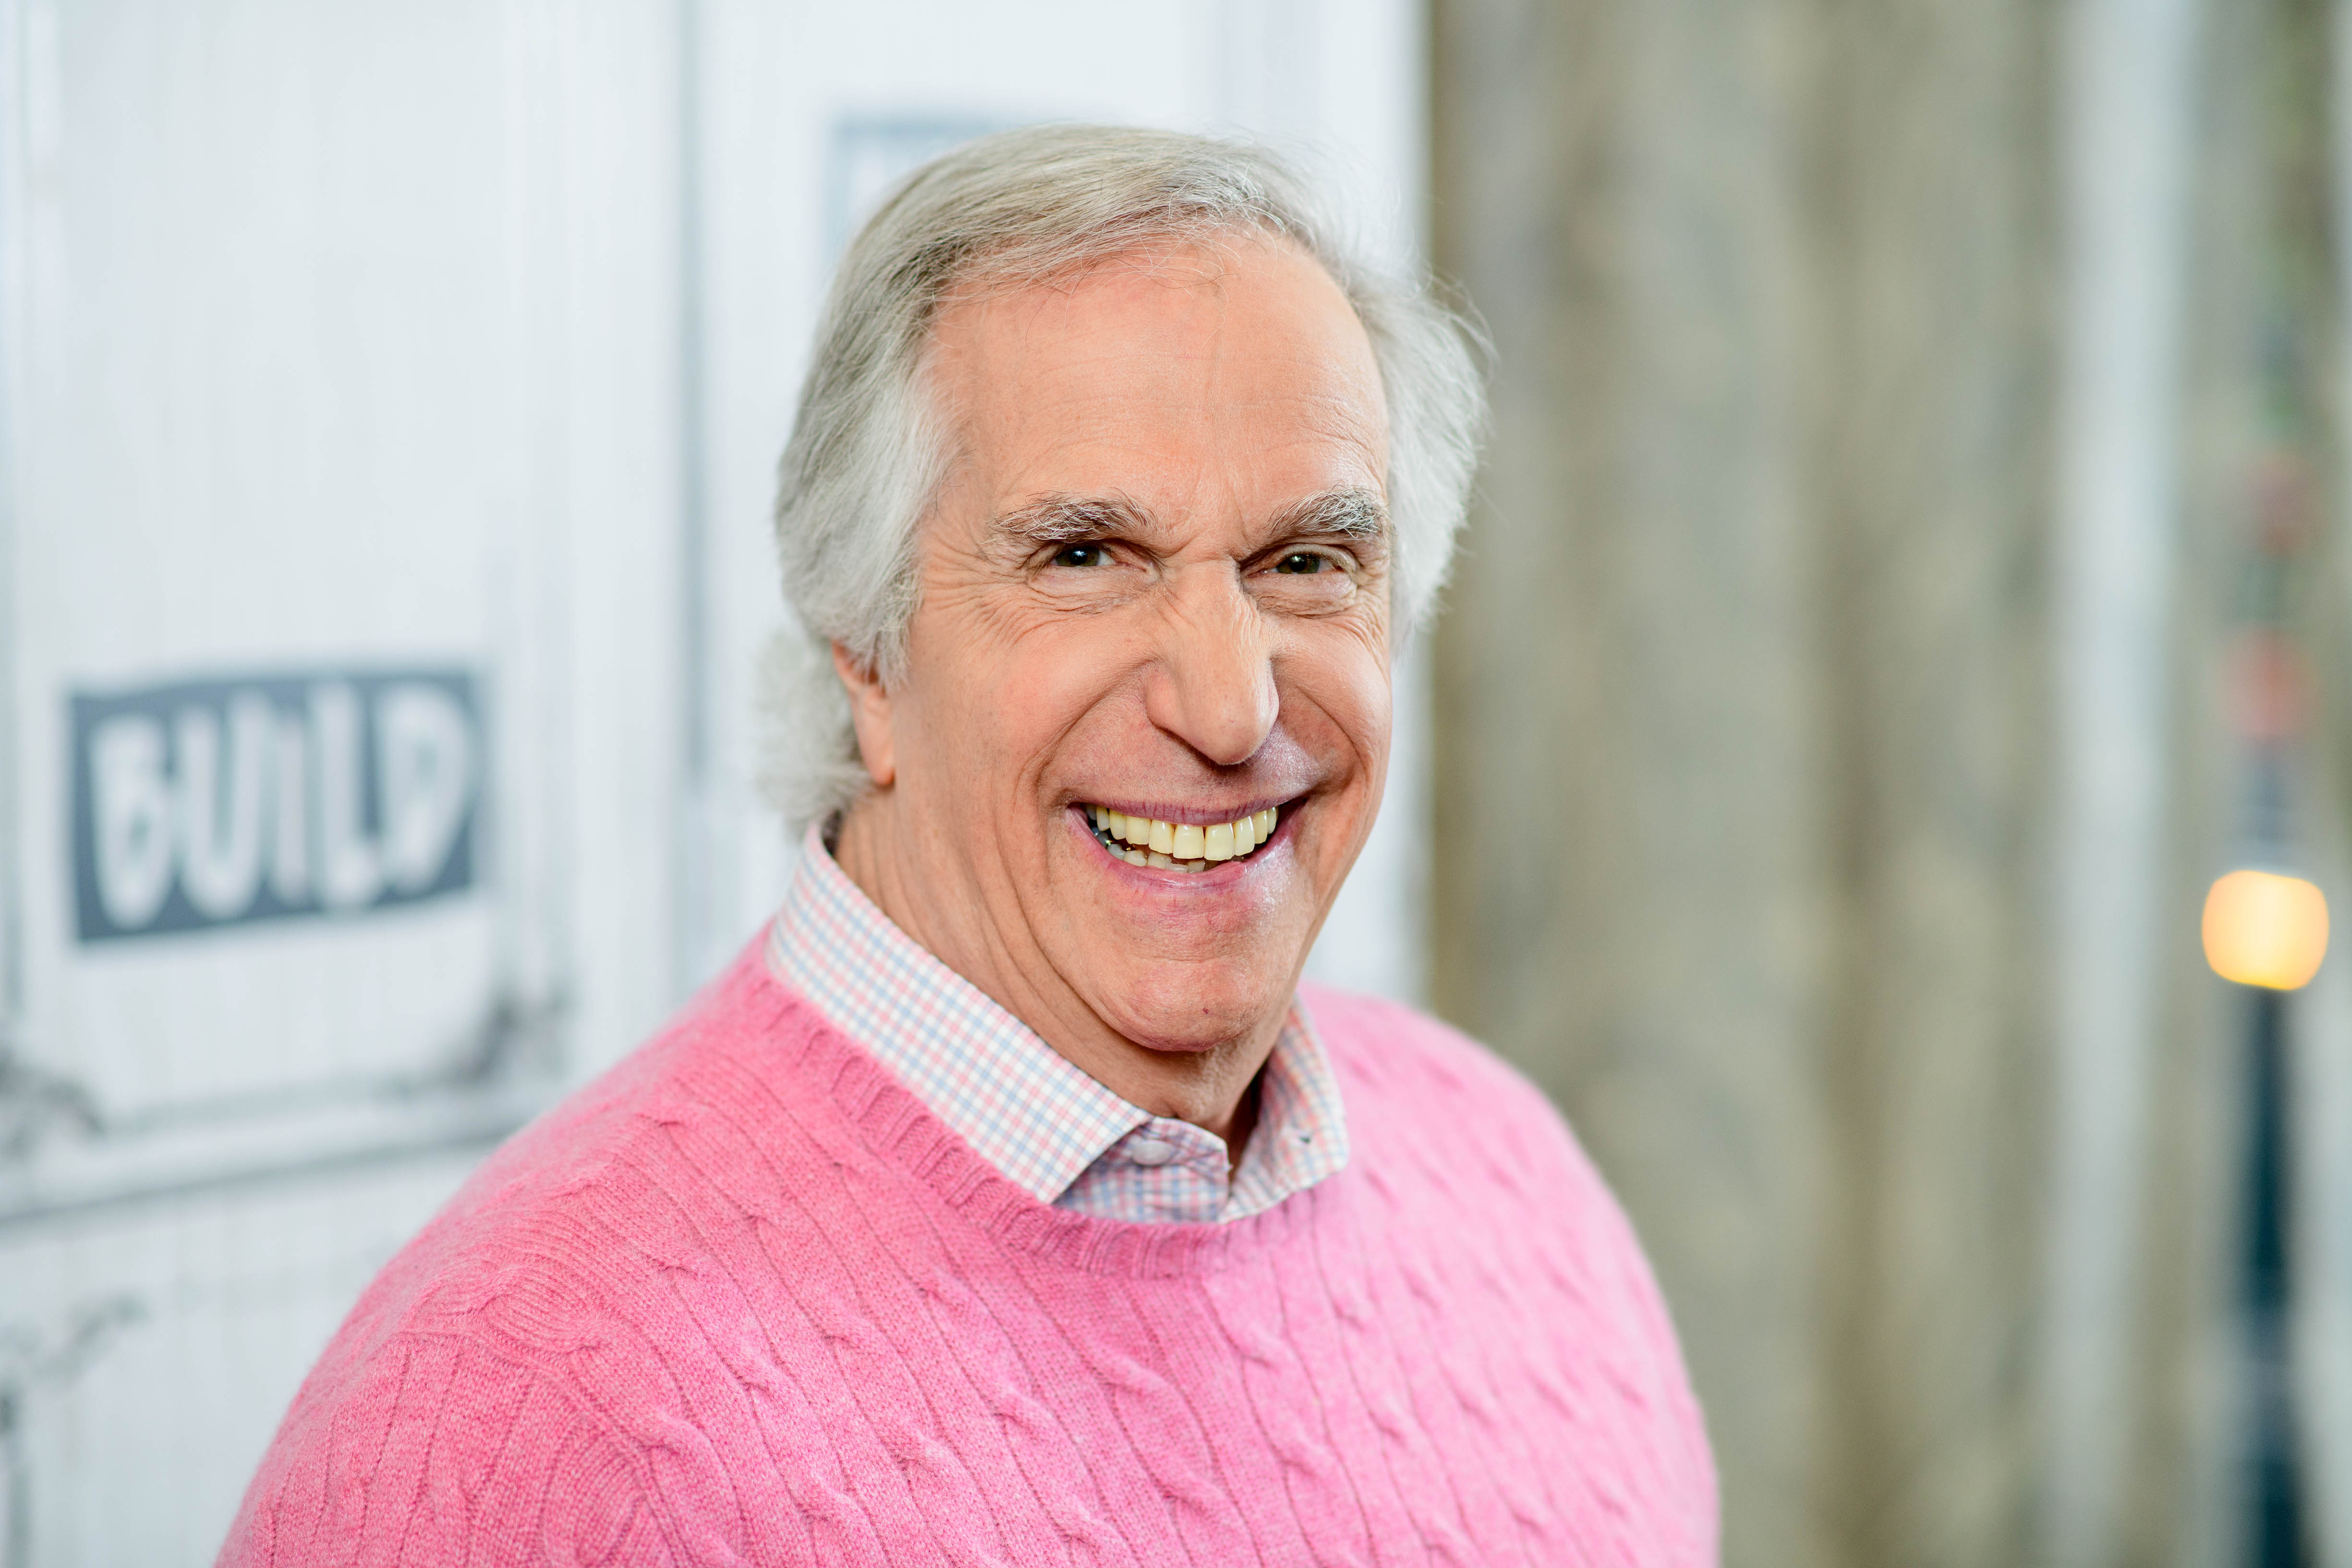 Henry Winkler discusses "Barry" with the Build Series at Build Studio on April 25, 2018 in New York City. | Source: Getty Images